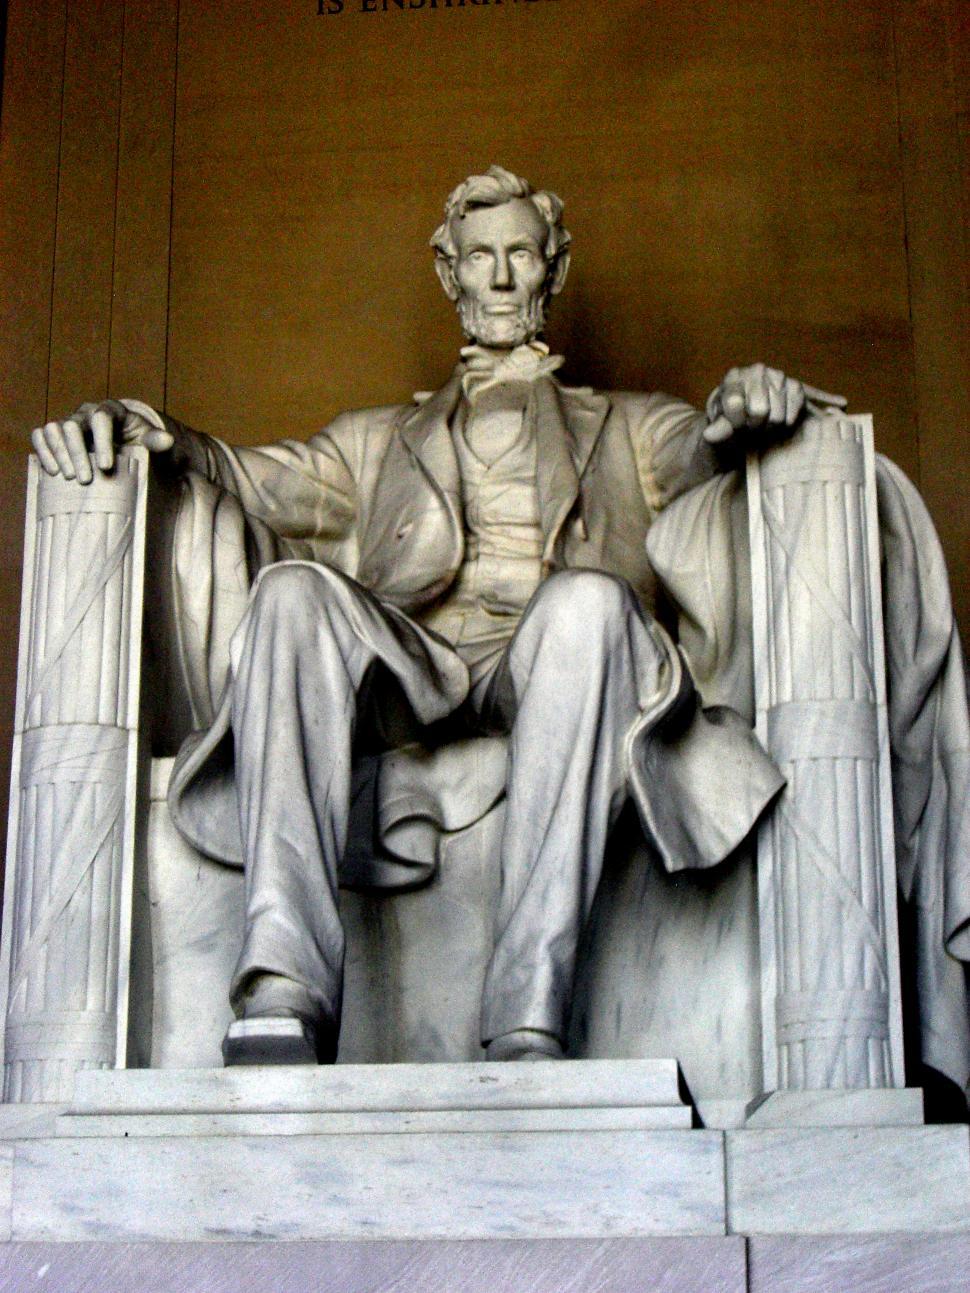 Free Image of Lincoln Memorial 